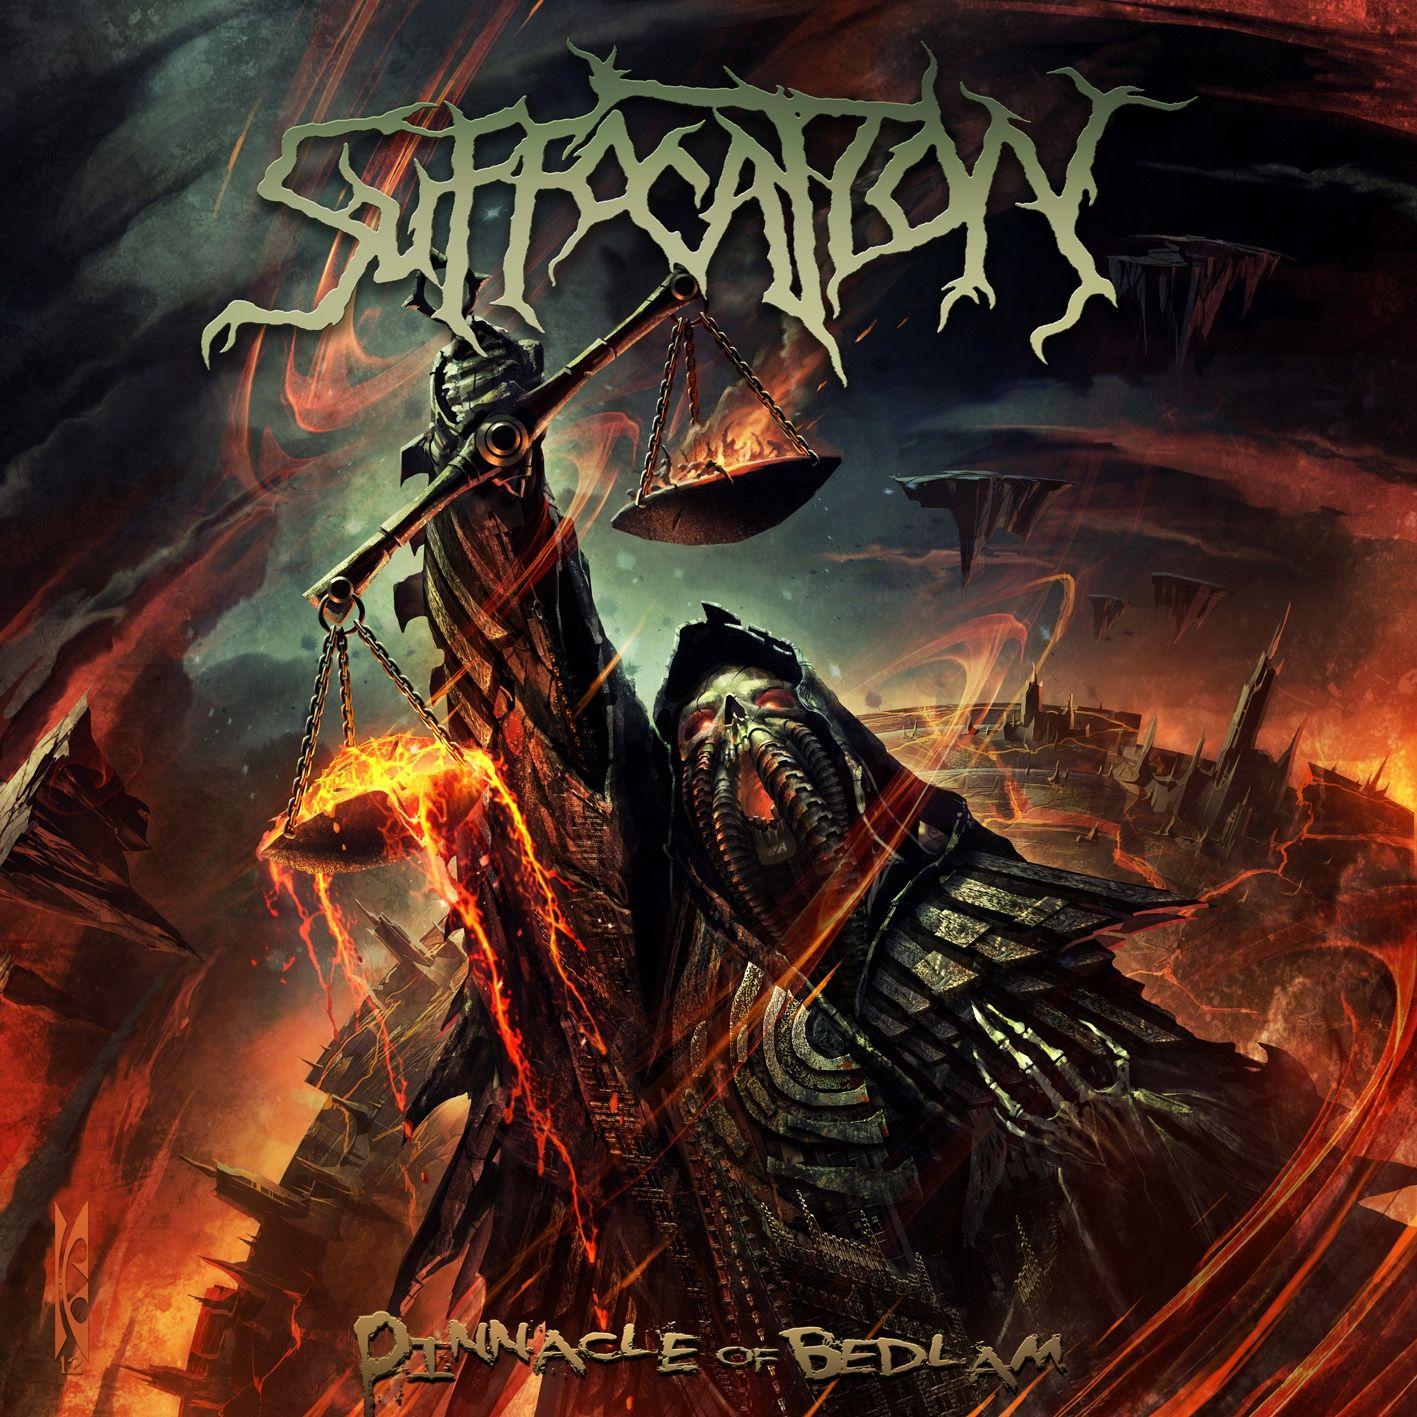 Death metal legends Suffocation return with crushing new 'Pinnacle